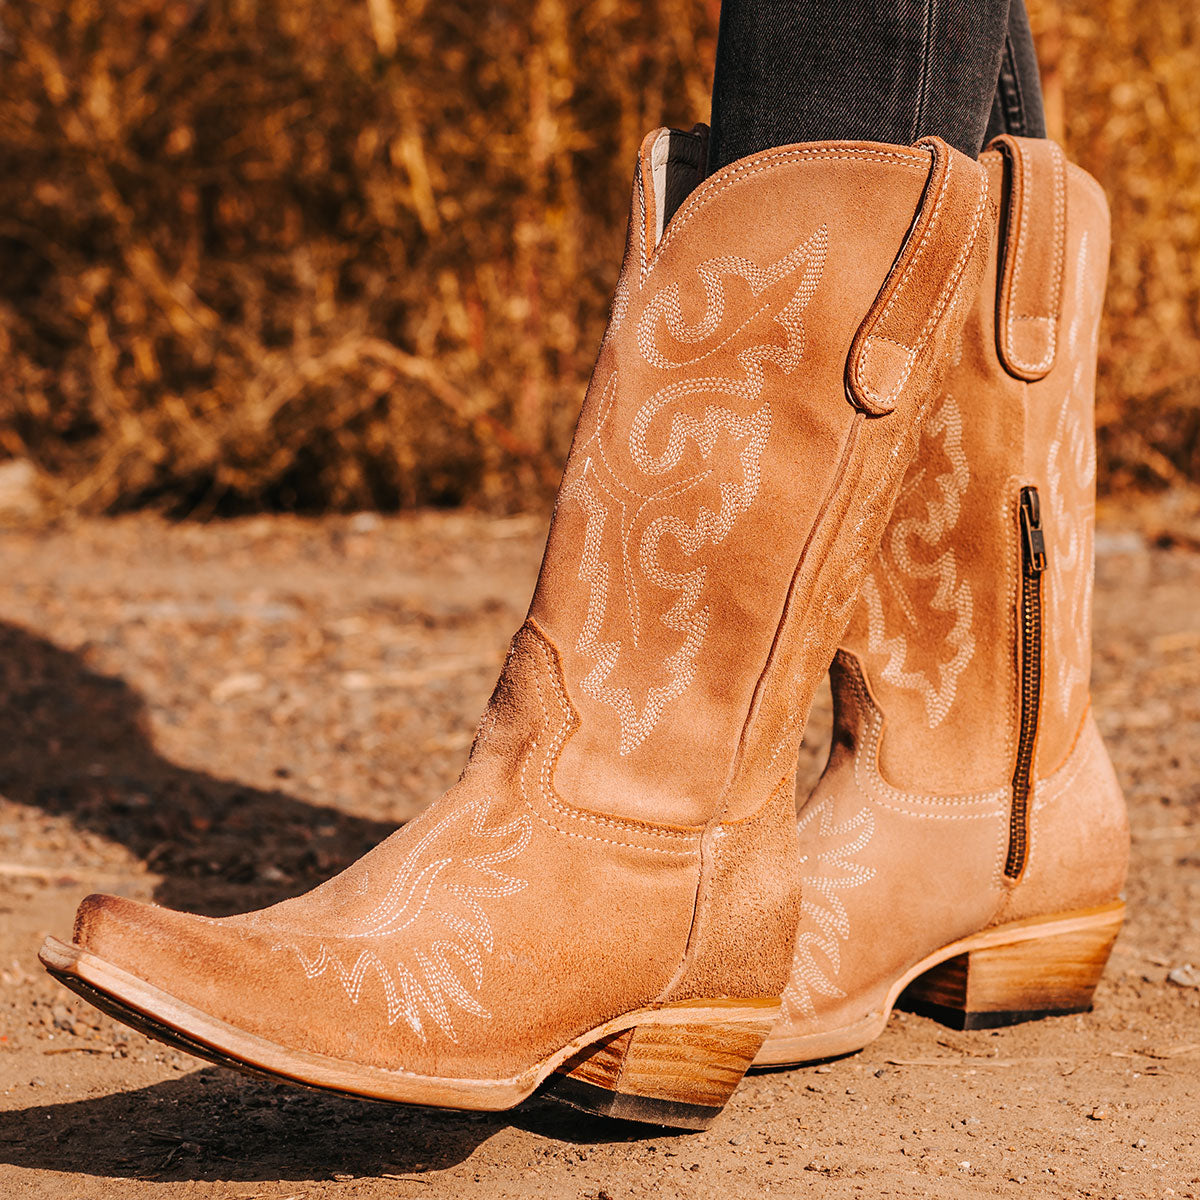 FREEBIRD women's Wilson blush suede western boot with snip toe construction, intricate shaft and toe stitching, and half zip closure